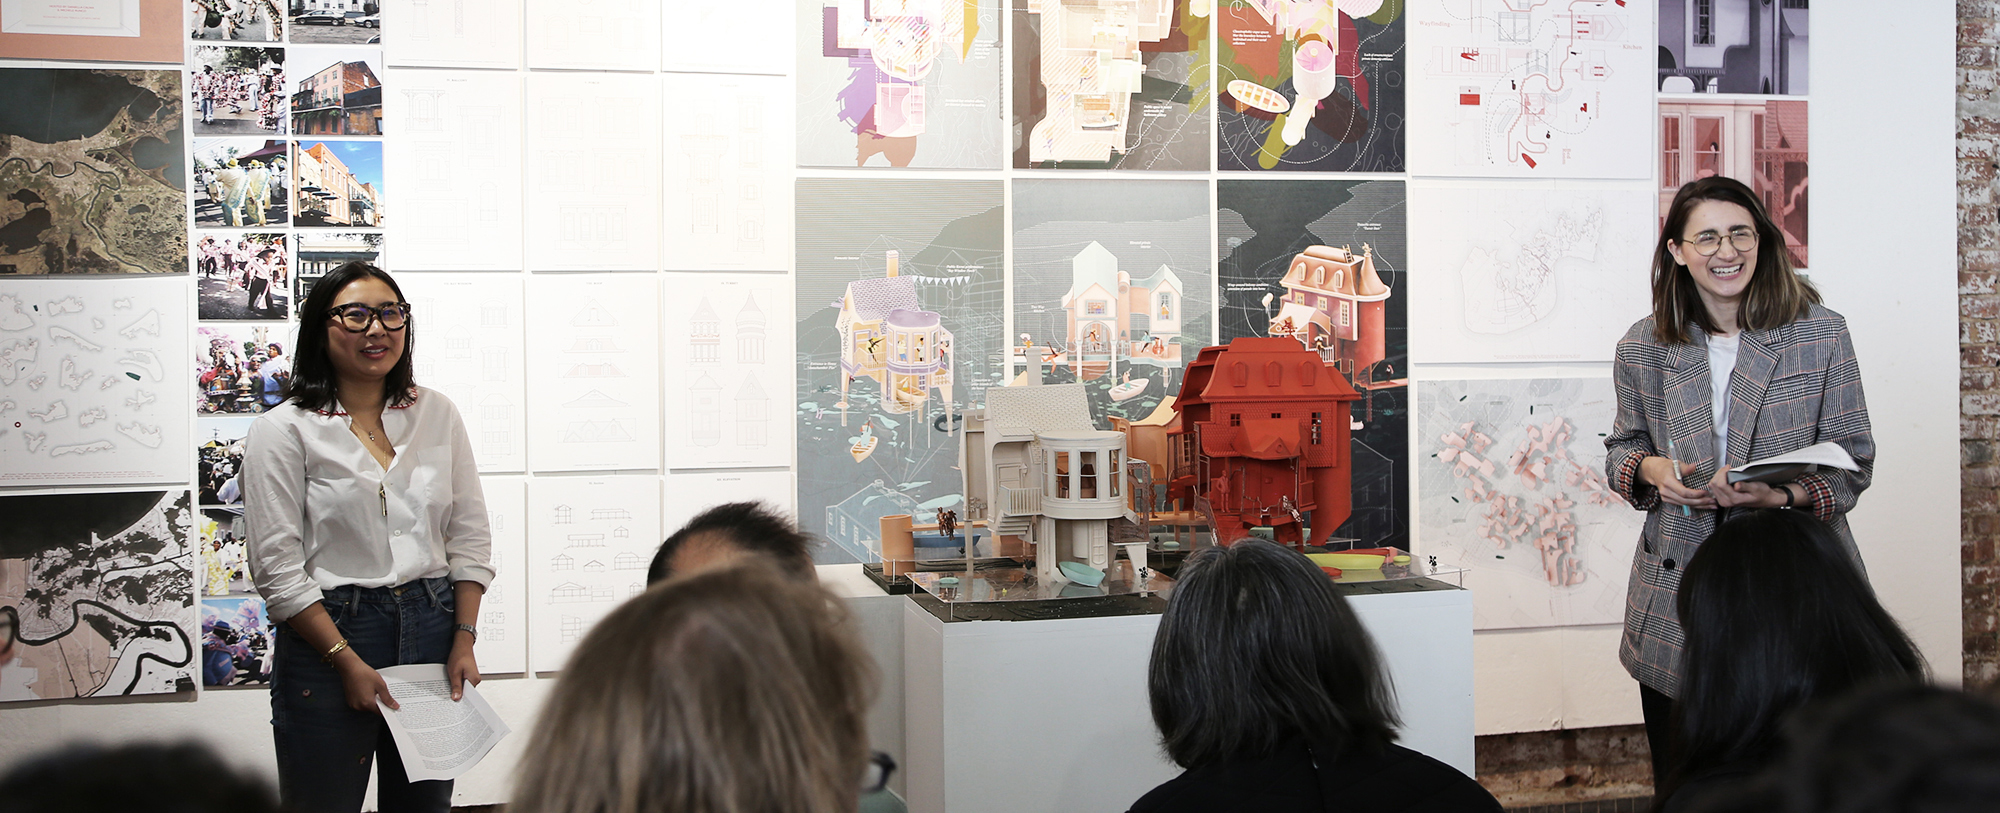 A person presents an architectural model in front of a group of attentive spectators.